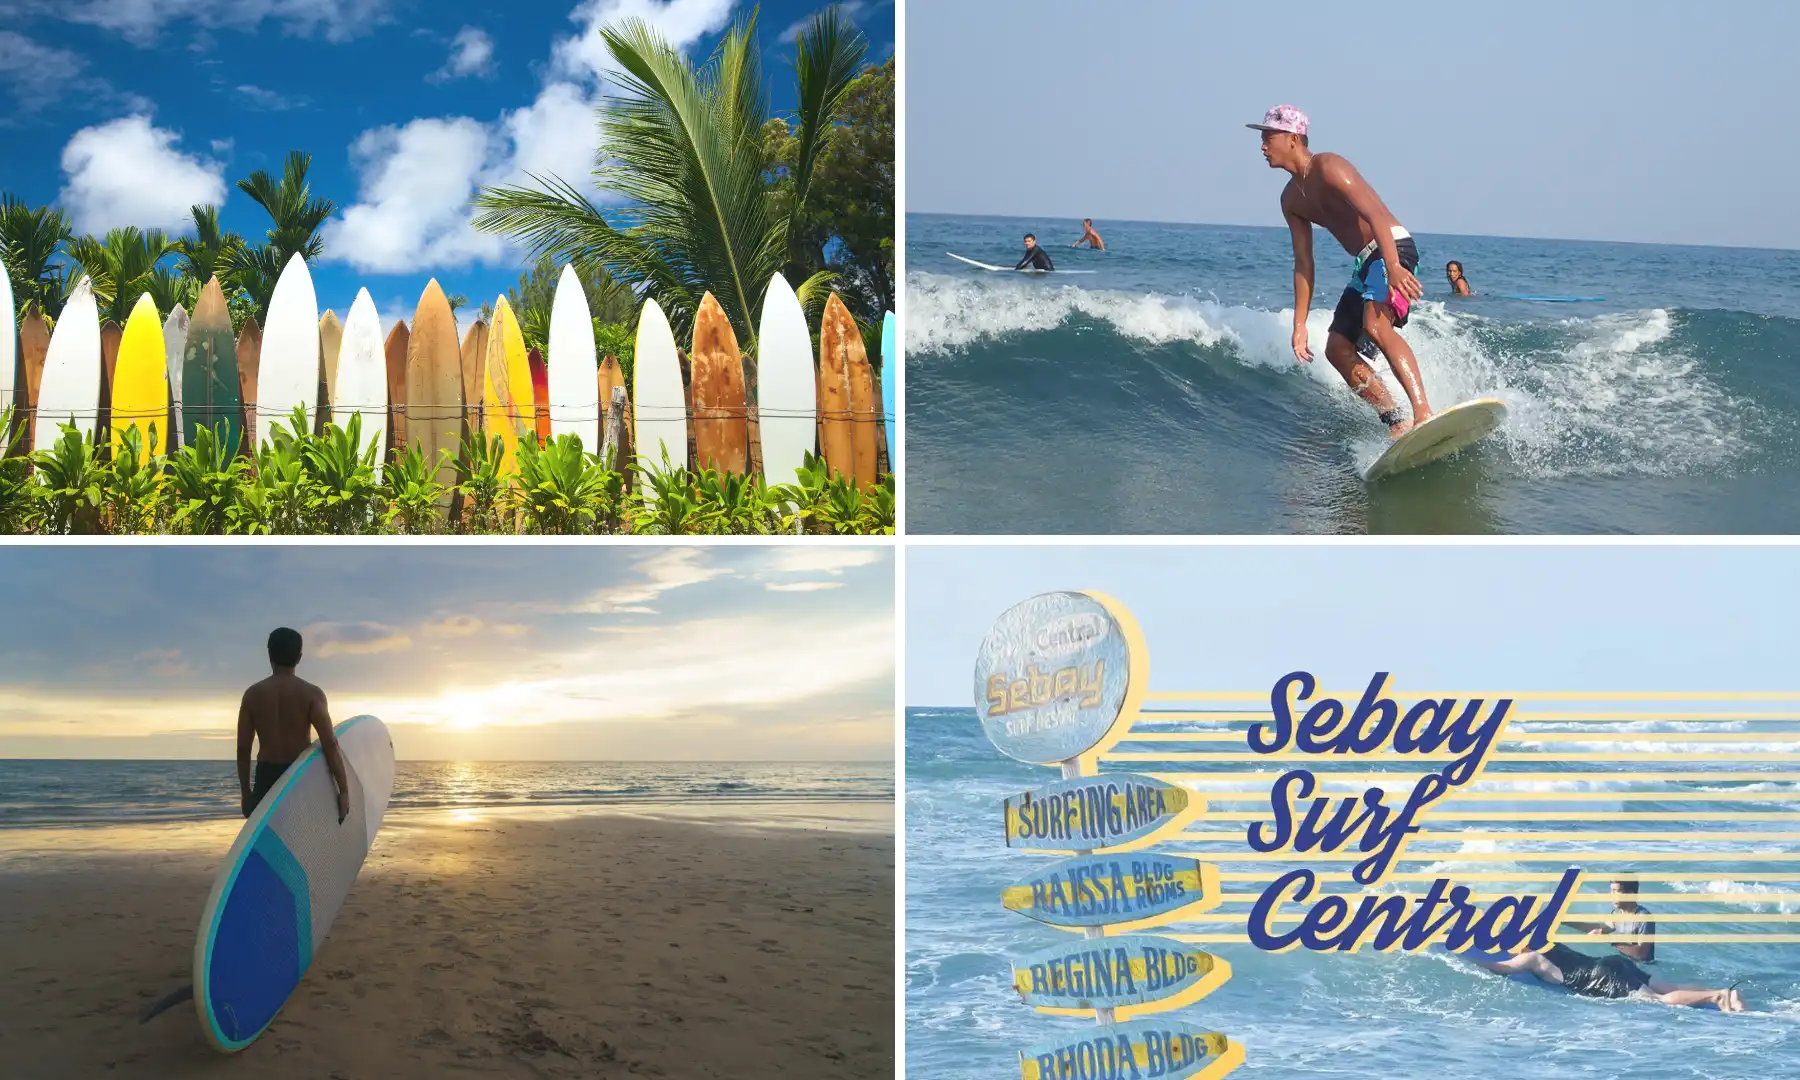 Best surfing spot in la union for beginners and experienced surfers